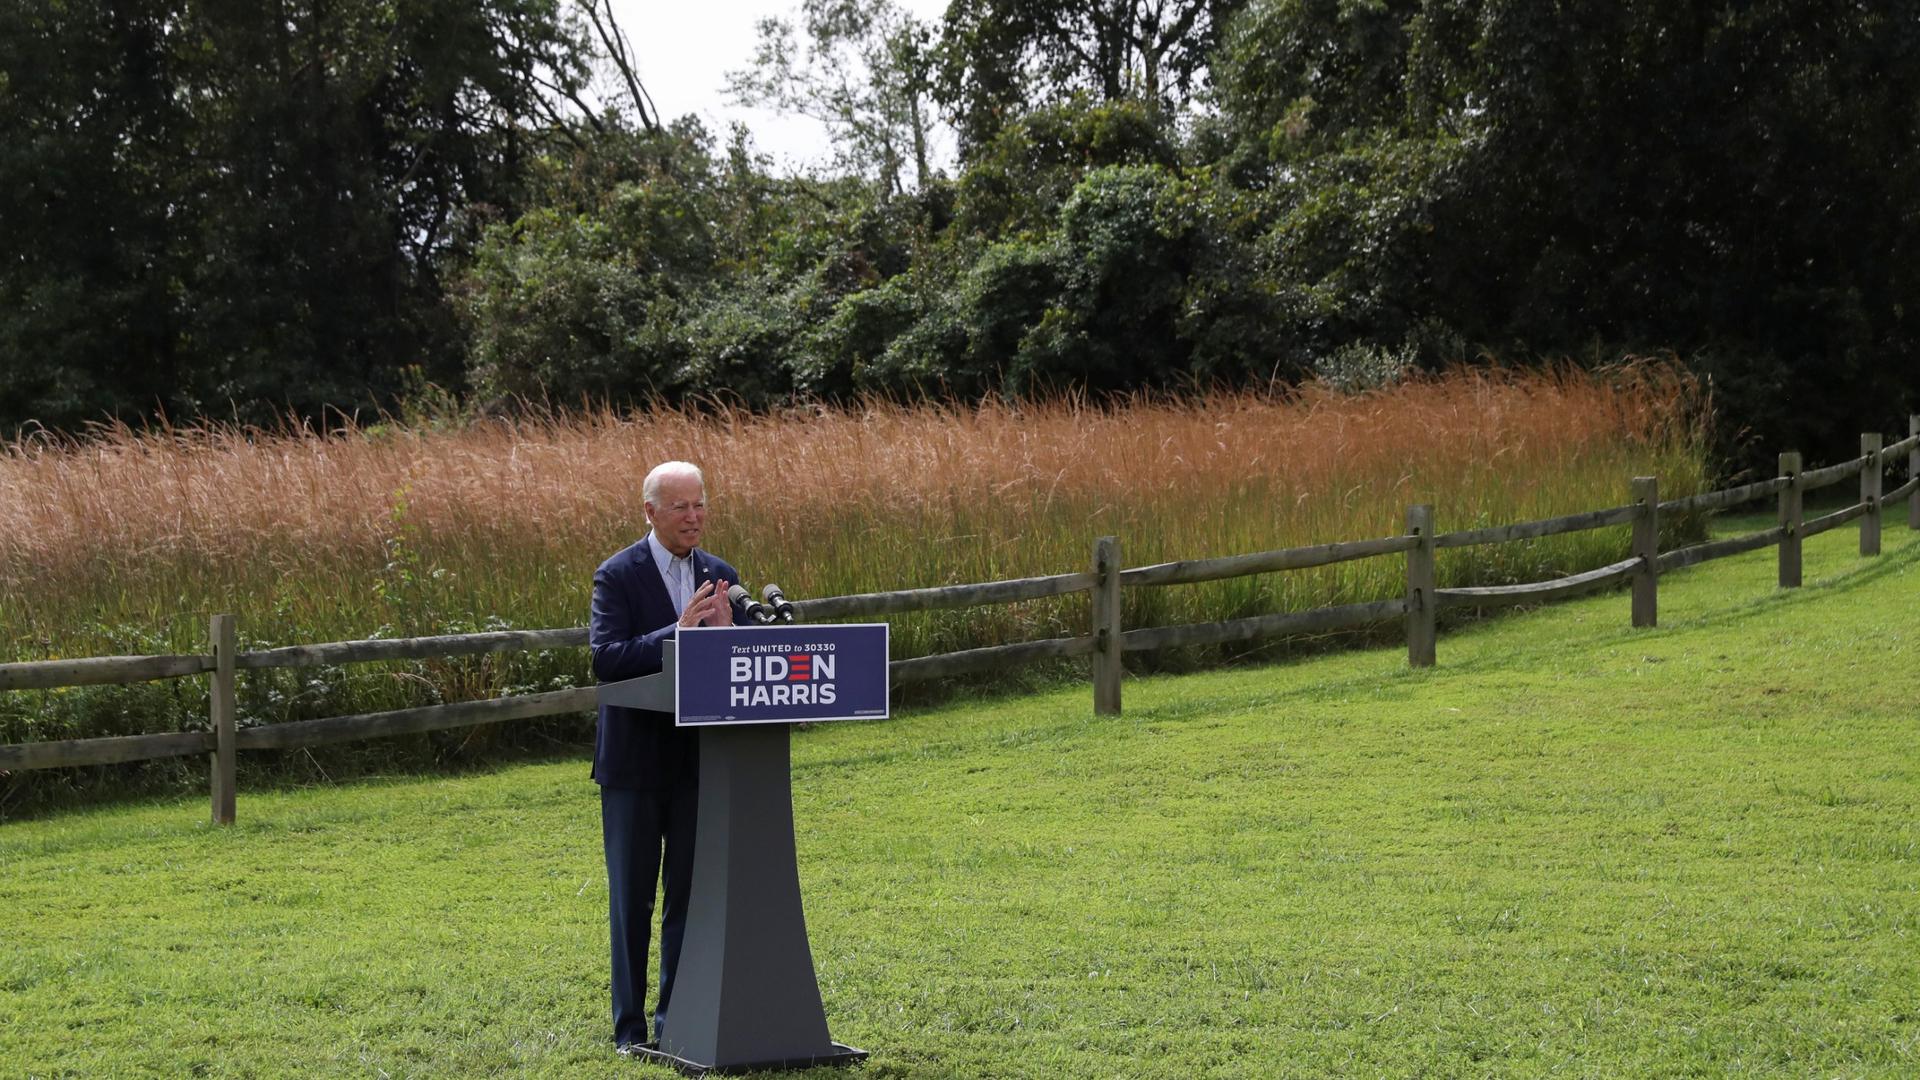 Standing in a grassy field, Joe Biden speaks about climate change during a campaign event held outside the Delaware Museum of Natural History in Wilmington, Delaware, Sept. 14, 2020.